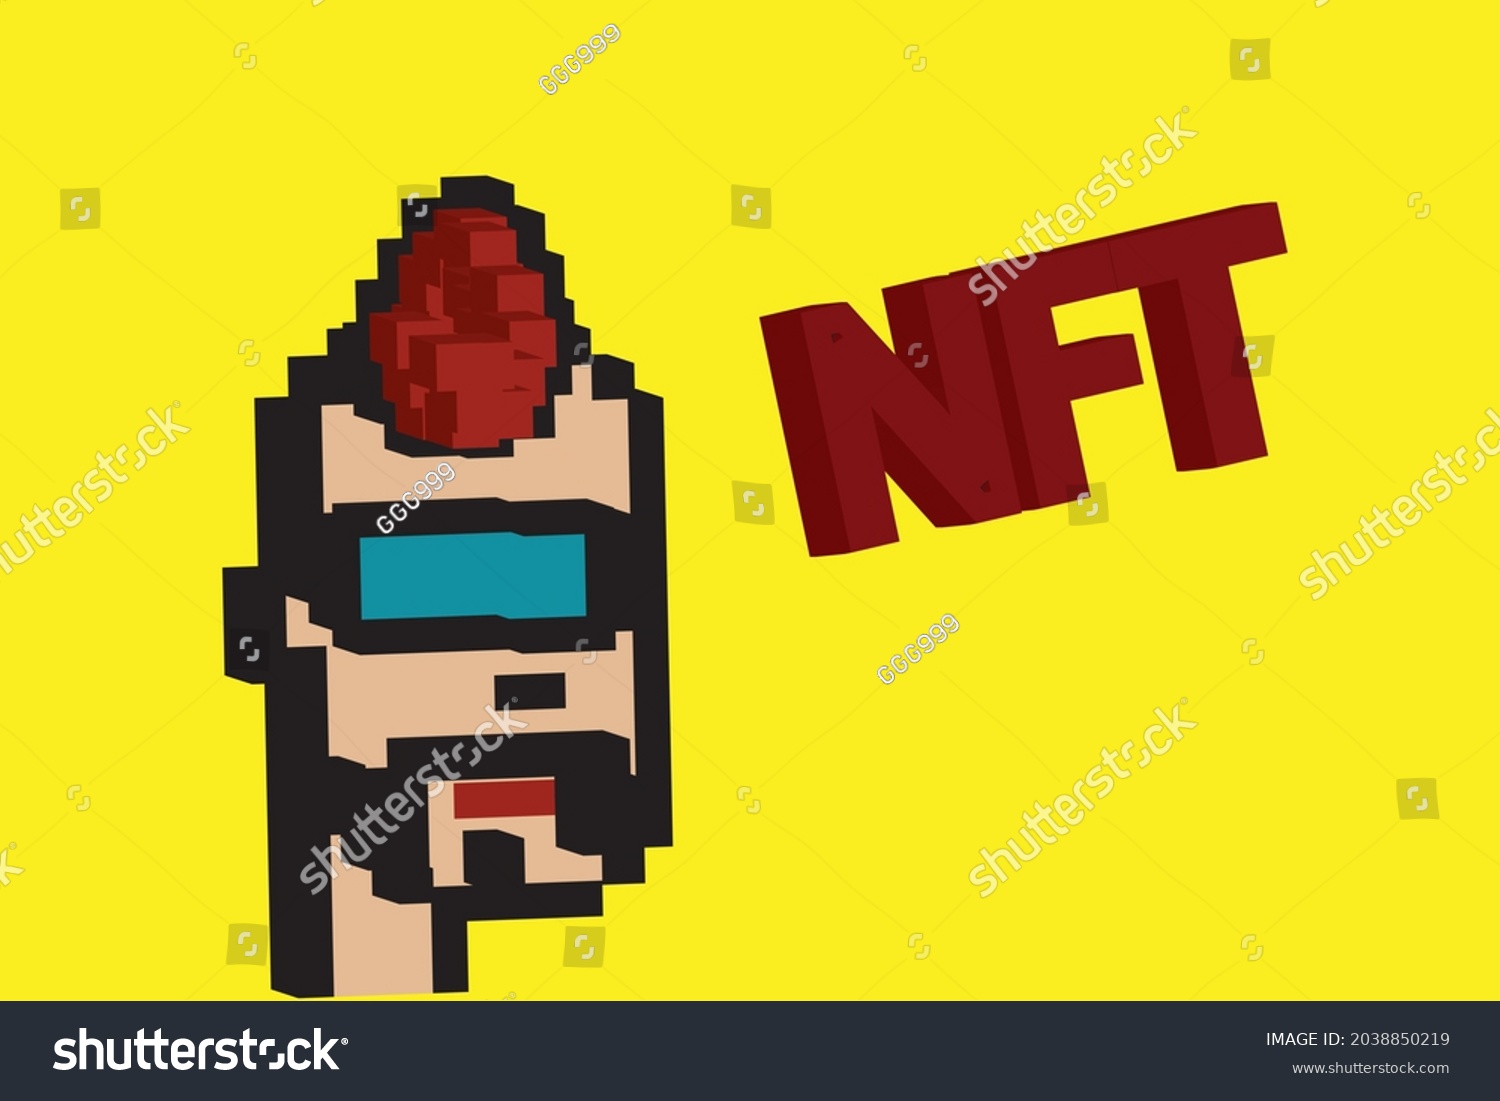 SVG of Cryptopunk NFT blockchain, non fungible token. Pixel art character red hair  game glasses 3d svg